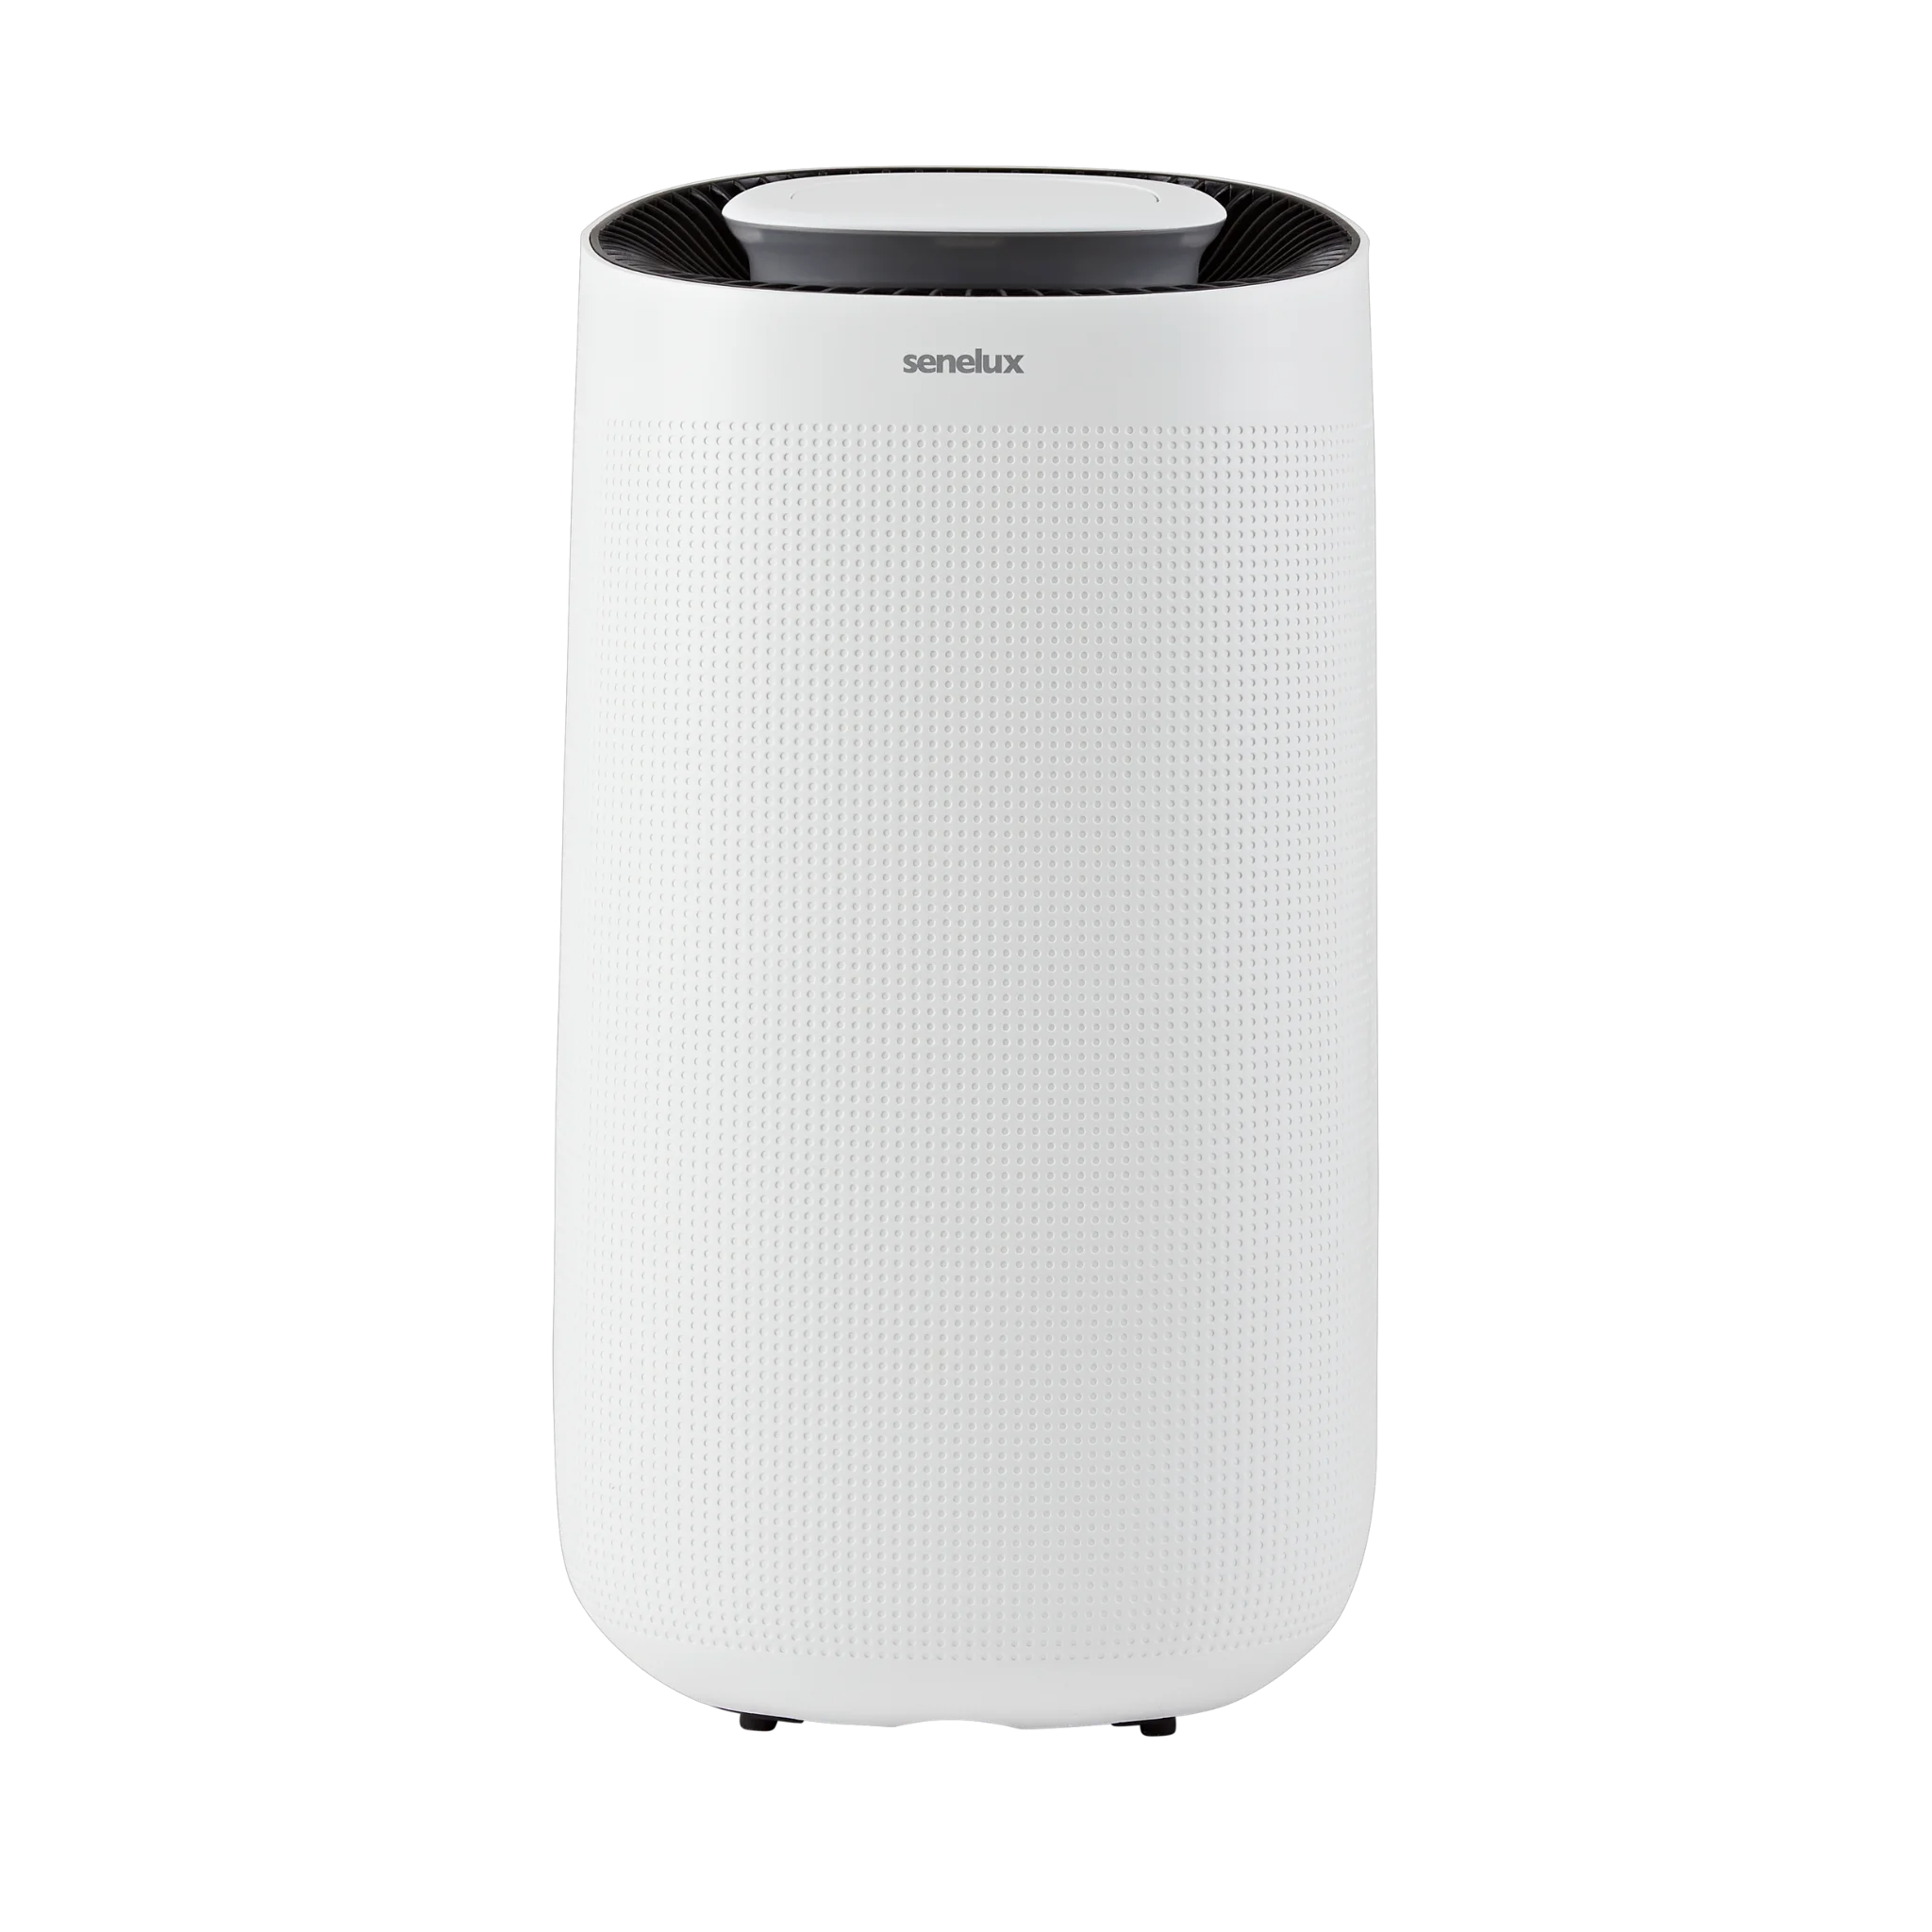 An image of a refurbished Senelux 12 litre per day dehumidifier facing front